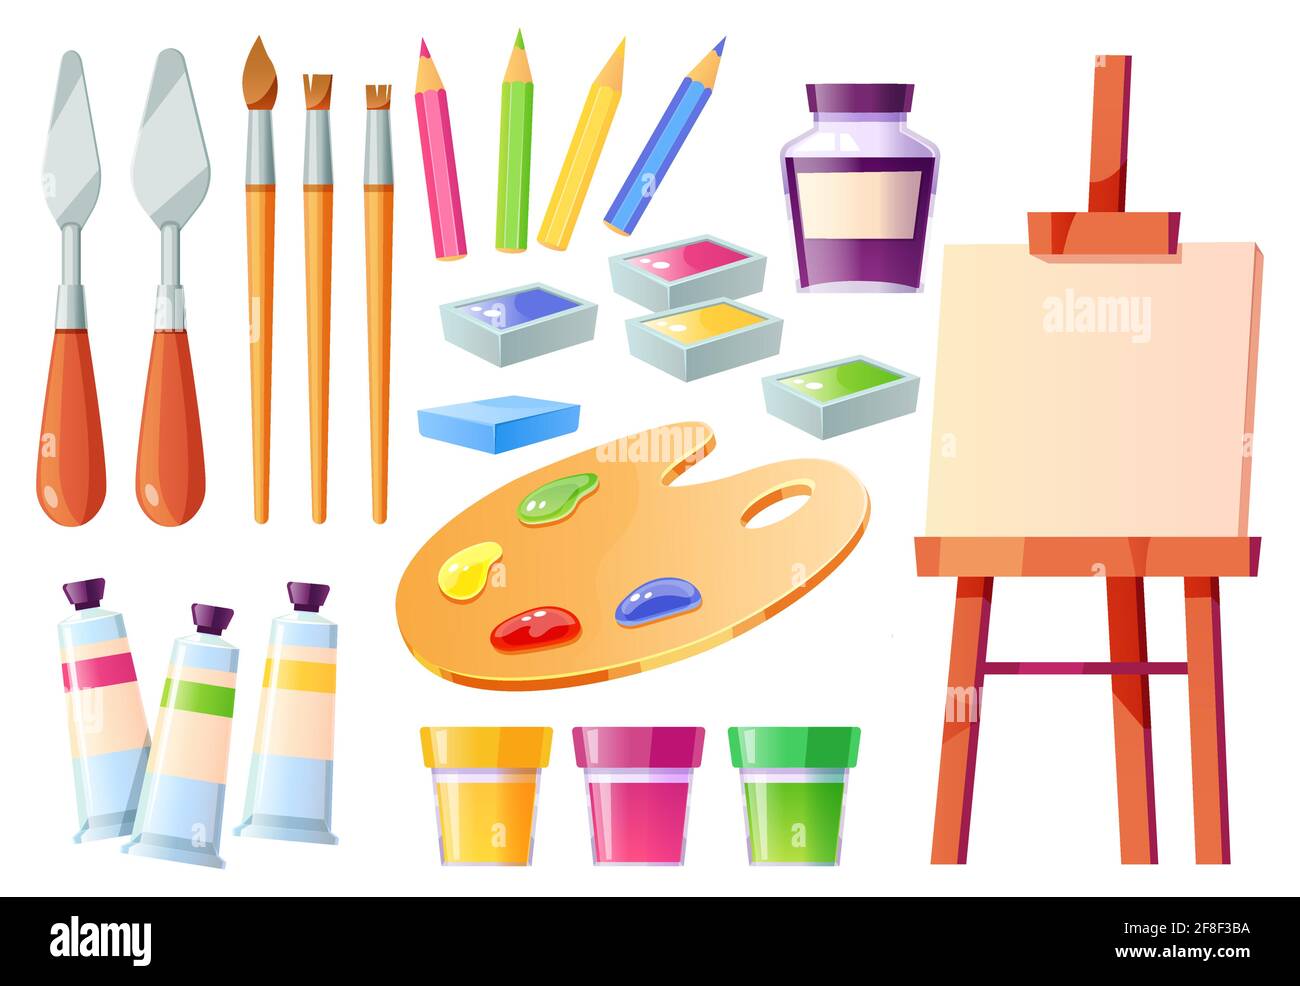 https://c8.alamy.com/comp/2F8F3BA/artist-tools-brushes-palette-easel-and-paints-creative-painter-equipment-for-craft-and-drawing-vector-cartoon-set-of-watercolor-acrylic-and-gouache-palette-knife-white-canvas-and-pencils-2F8F3BA.jpg